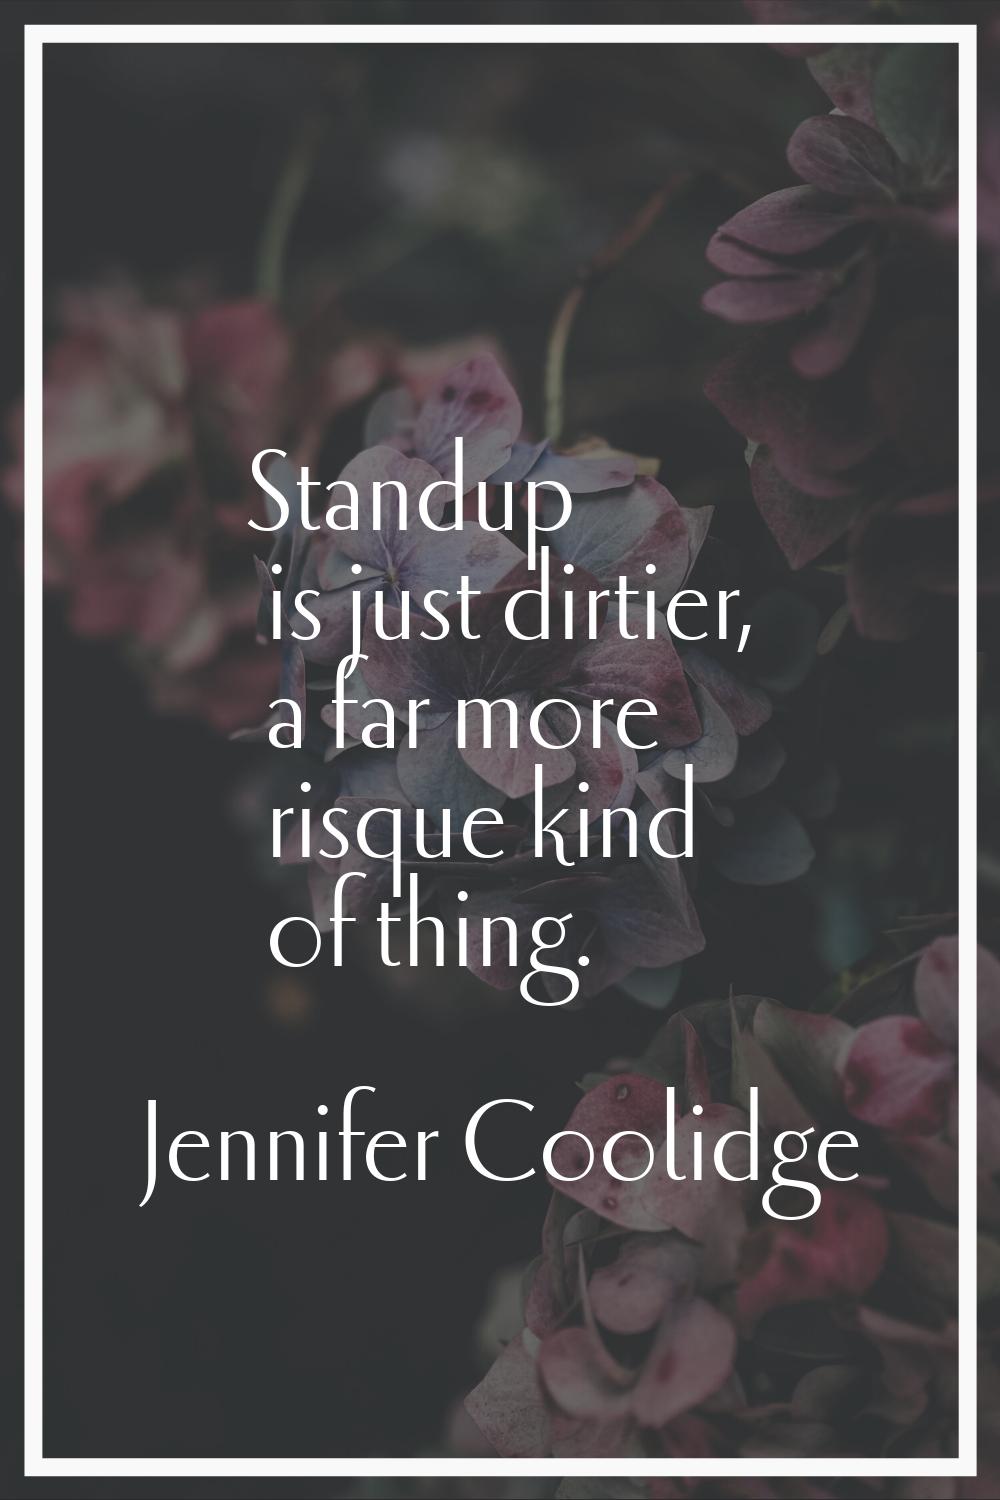 Standup is just dirtier, a far more risque kind of thing.